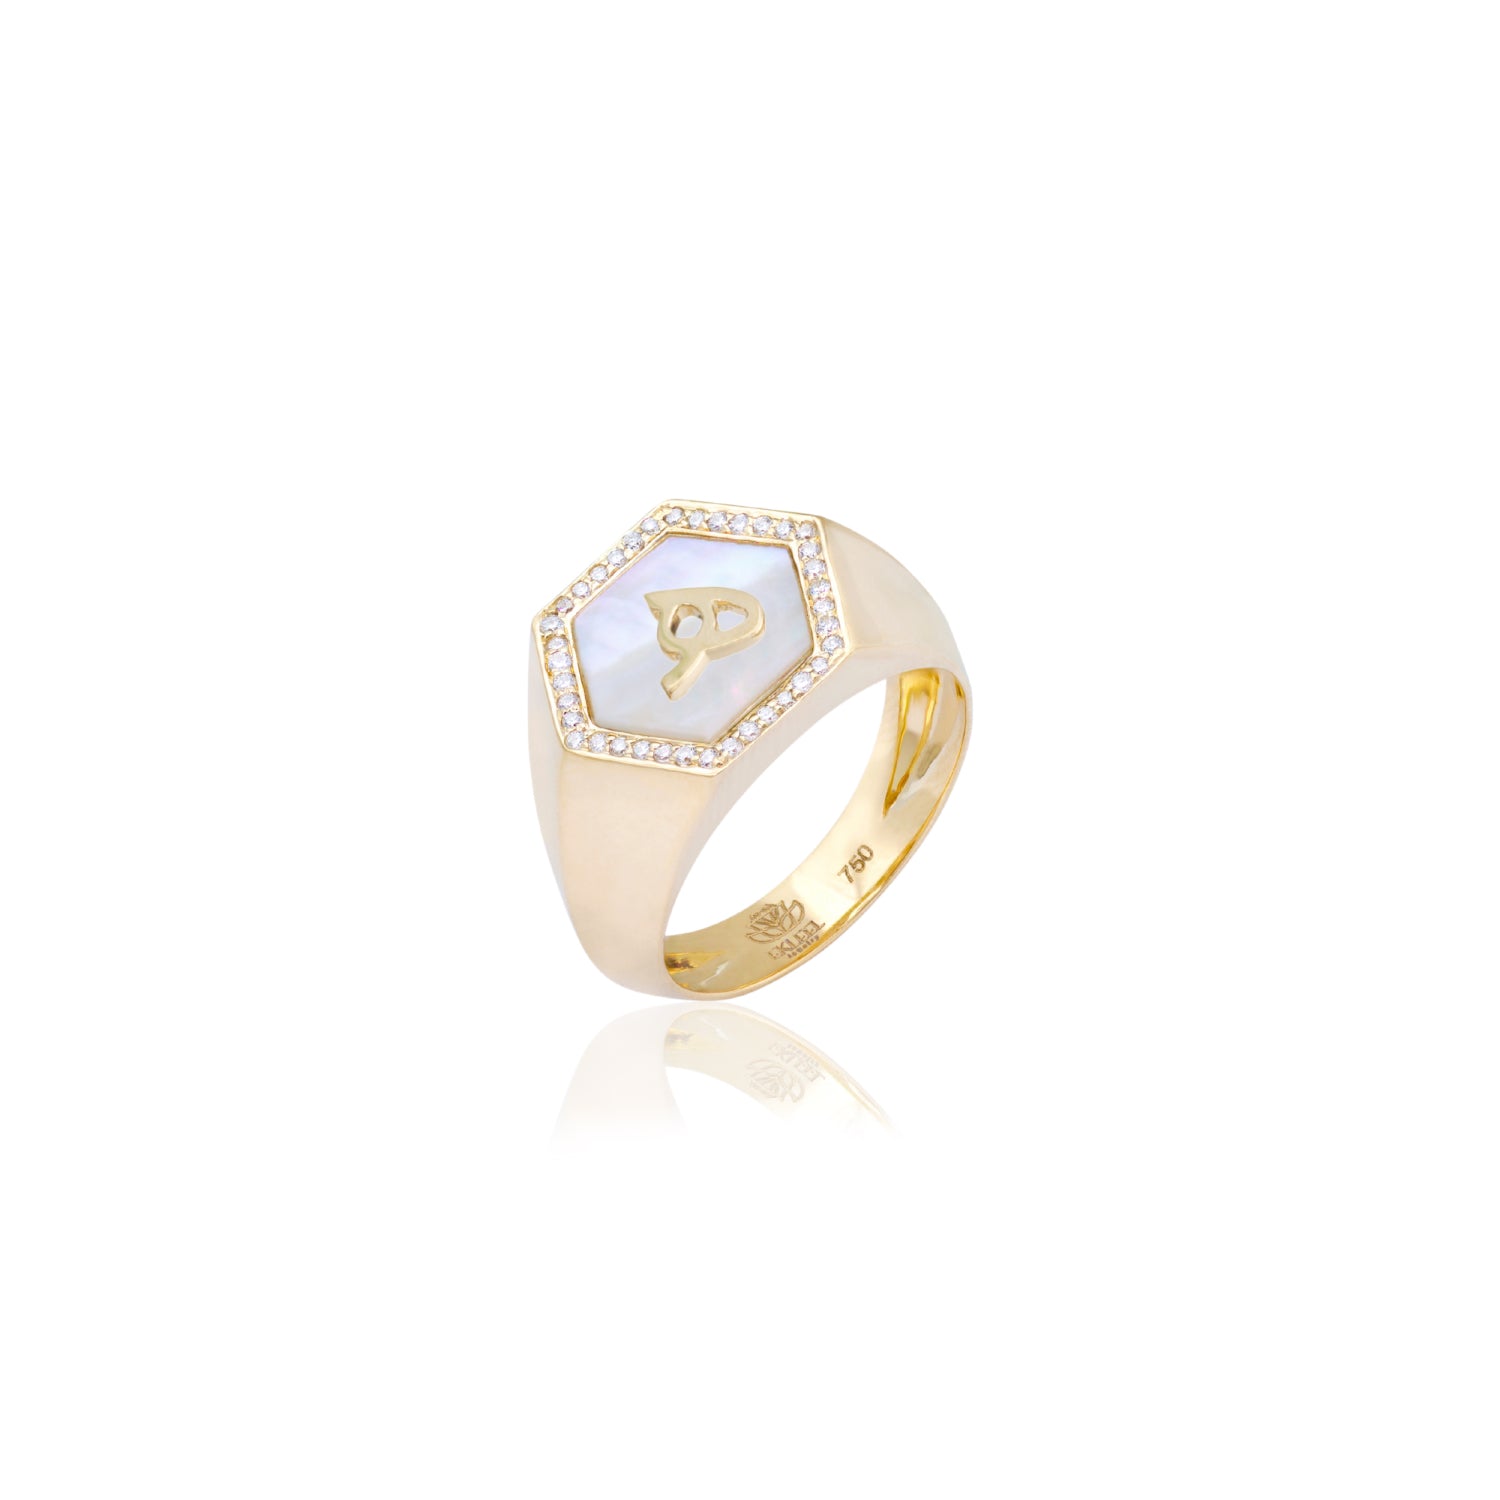 Qamoos 2.0 Letter هـ White Mother of Pearl and Diamond Signet Ring in Yellow Gold